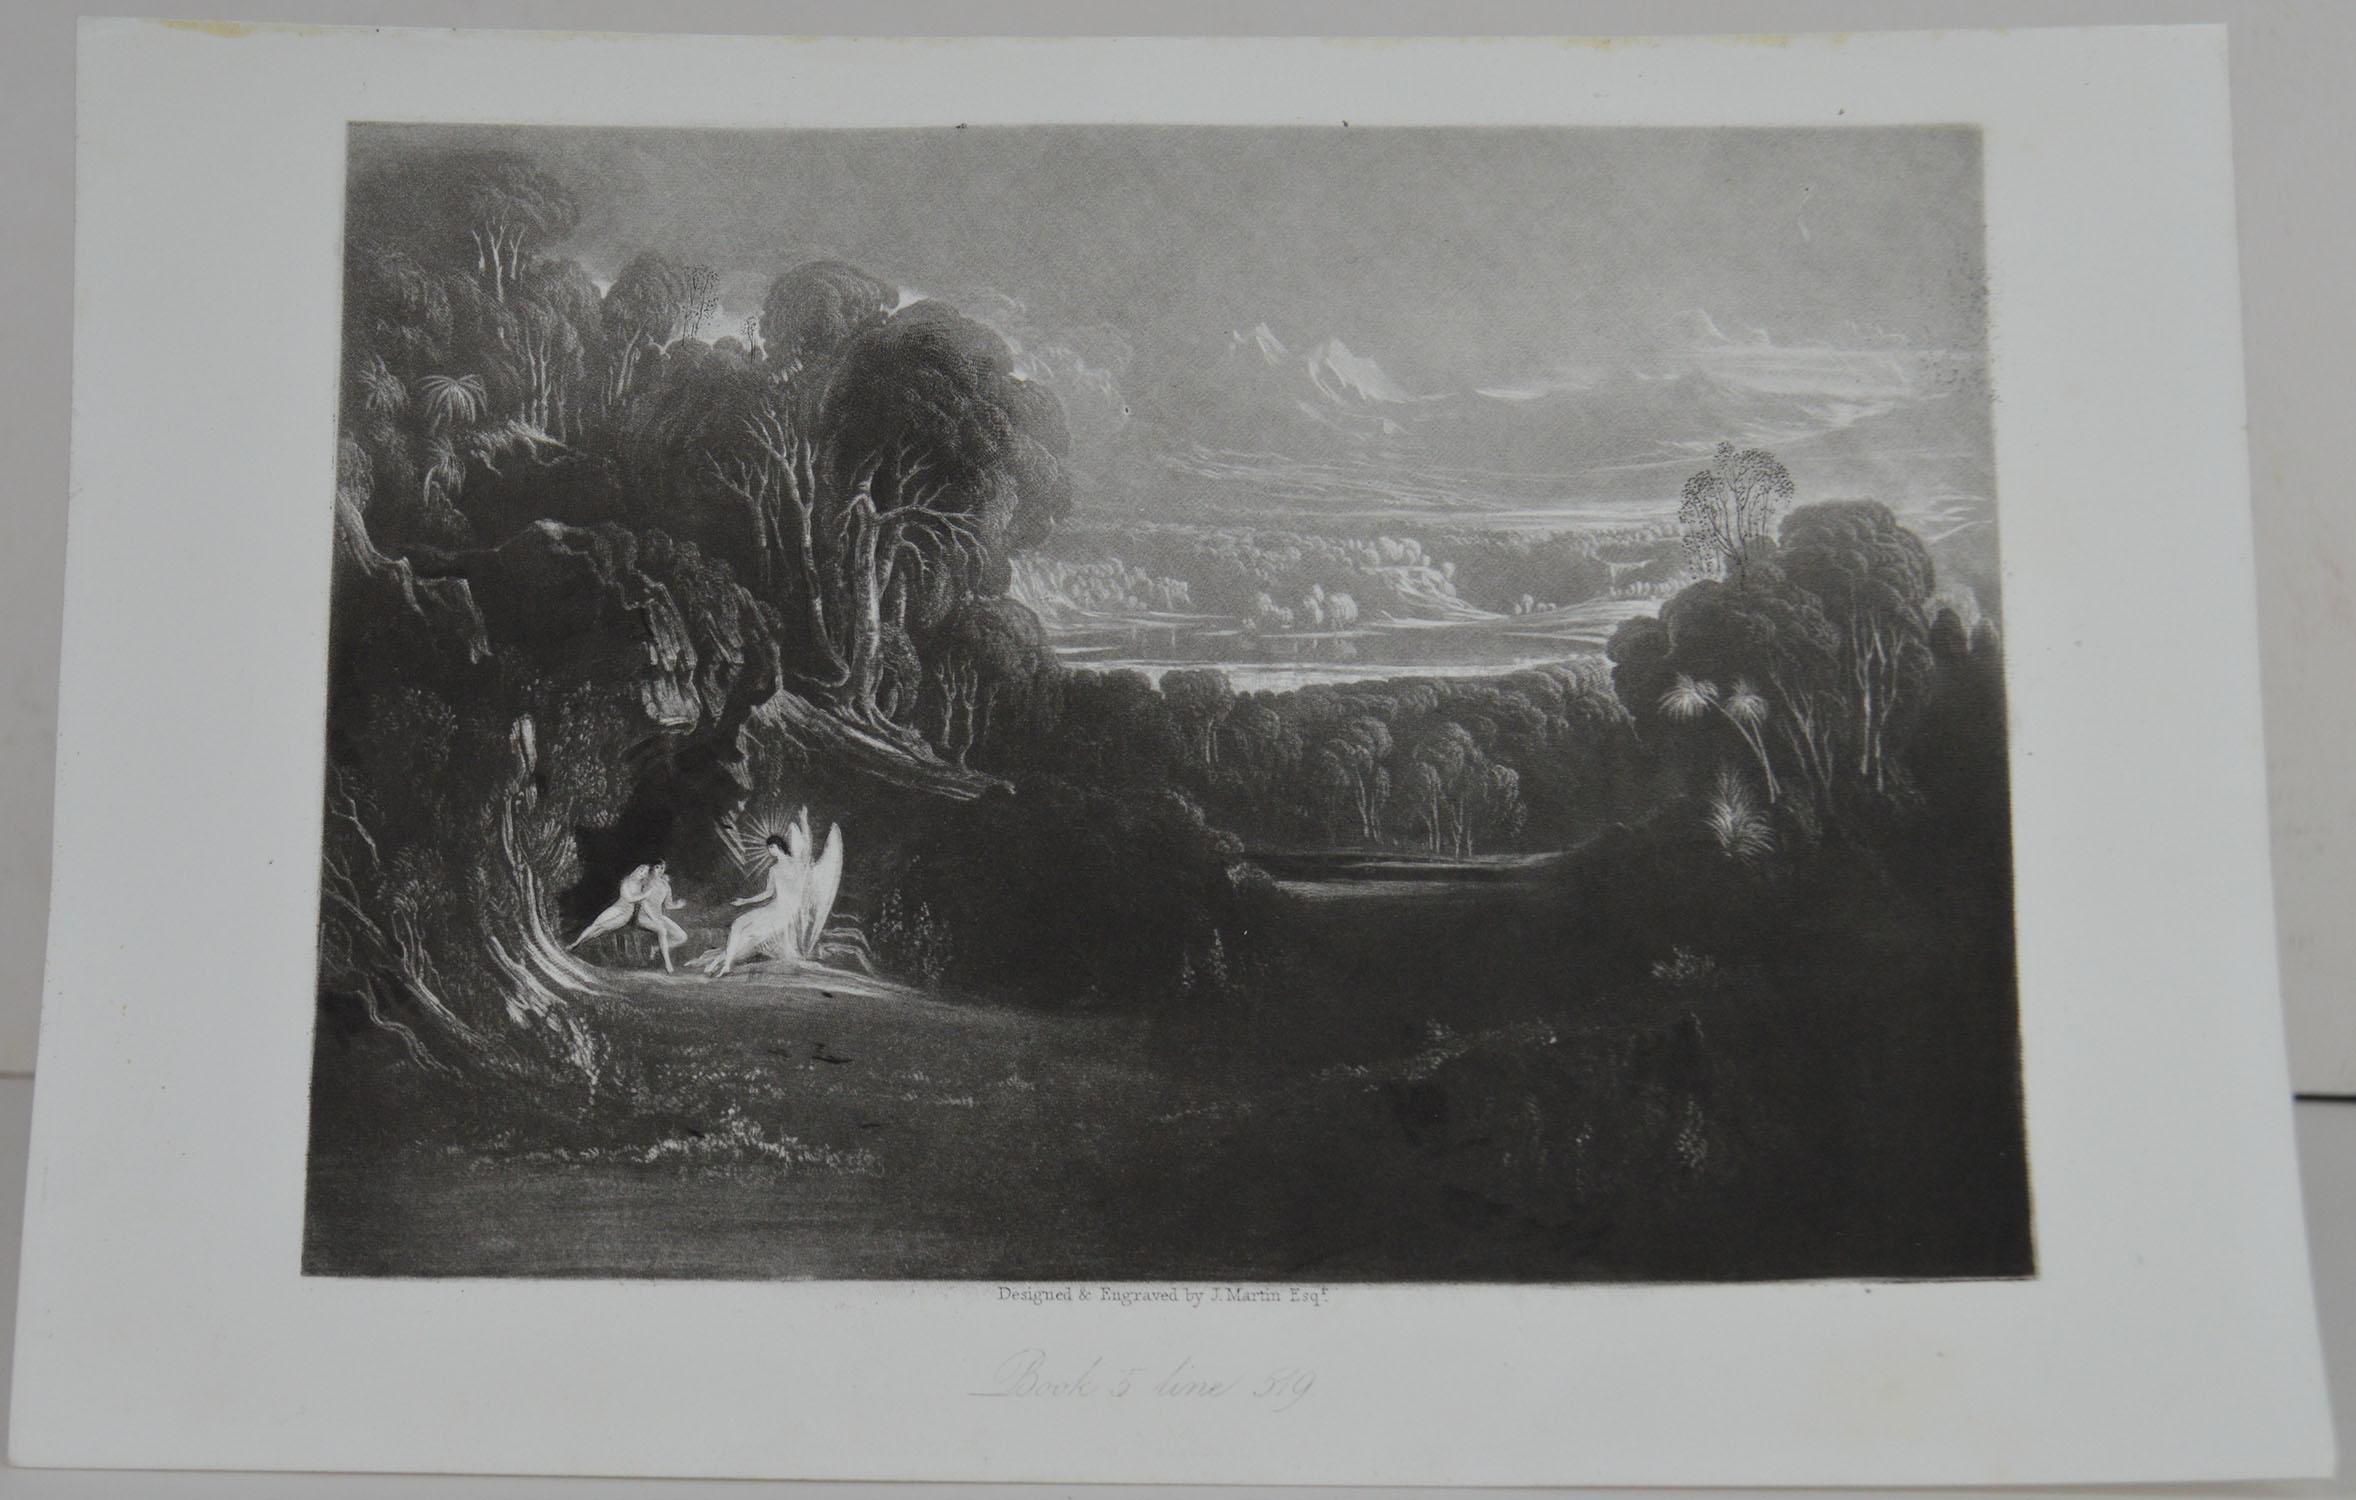 Sensational image by John Martin.

Titled: Raphael Conversing with Adam and Eve

Drawn and engraved by John Martin. From the highly regarded Washbourne Publication of Milton's Paradise Lost, 1853.

Unframed.

